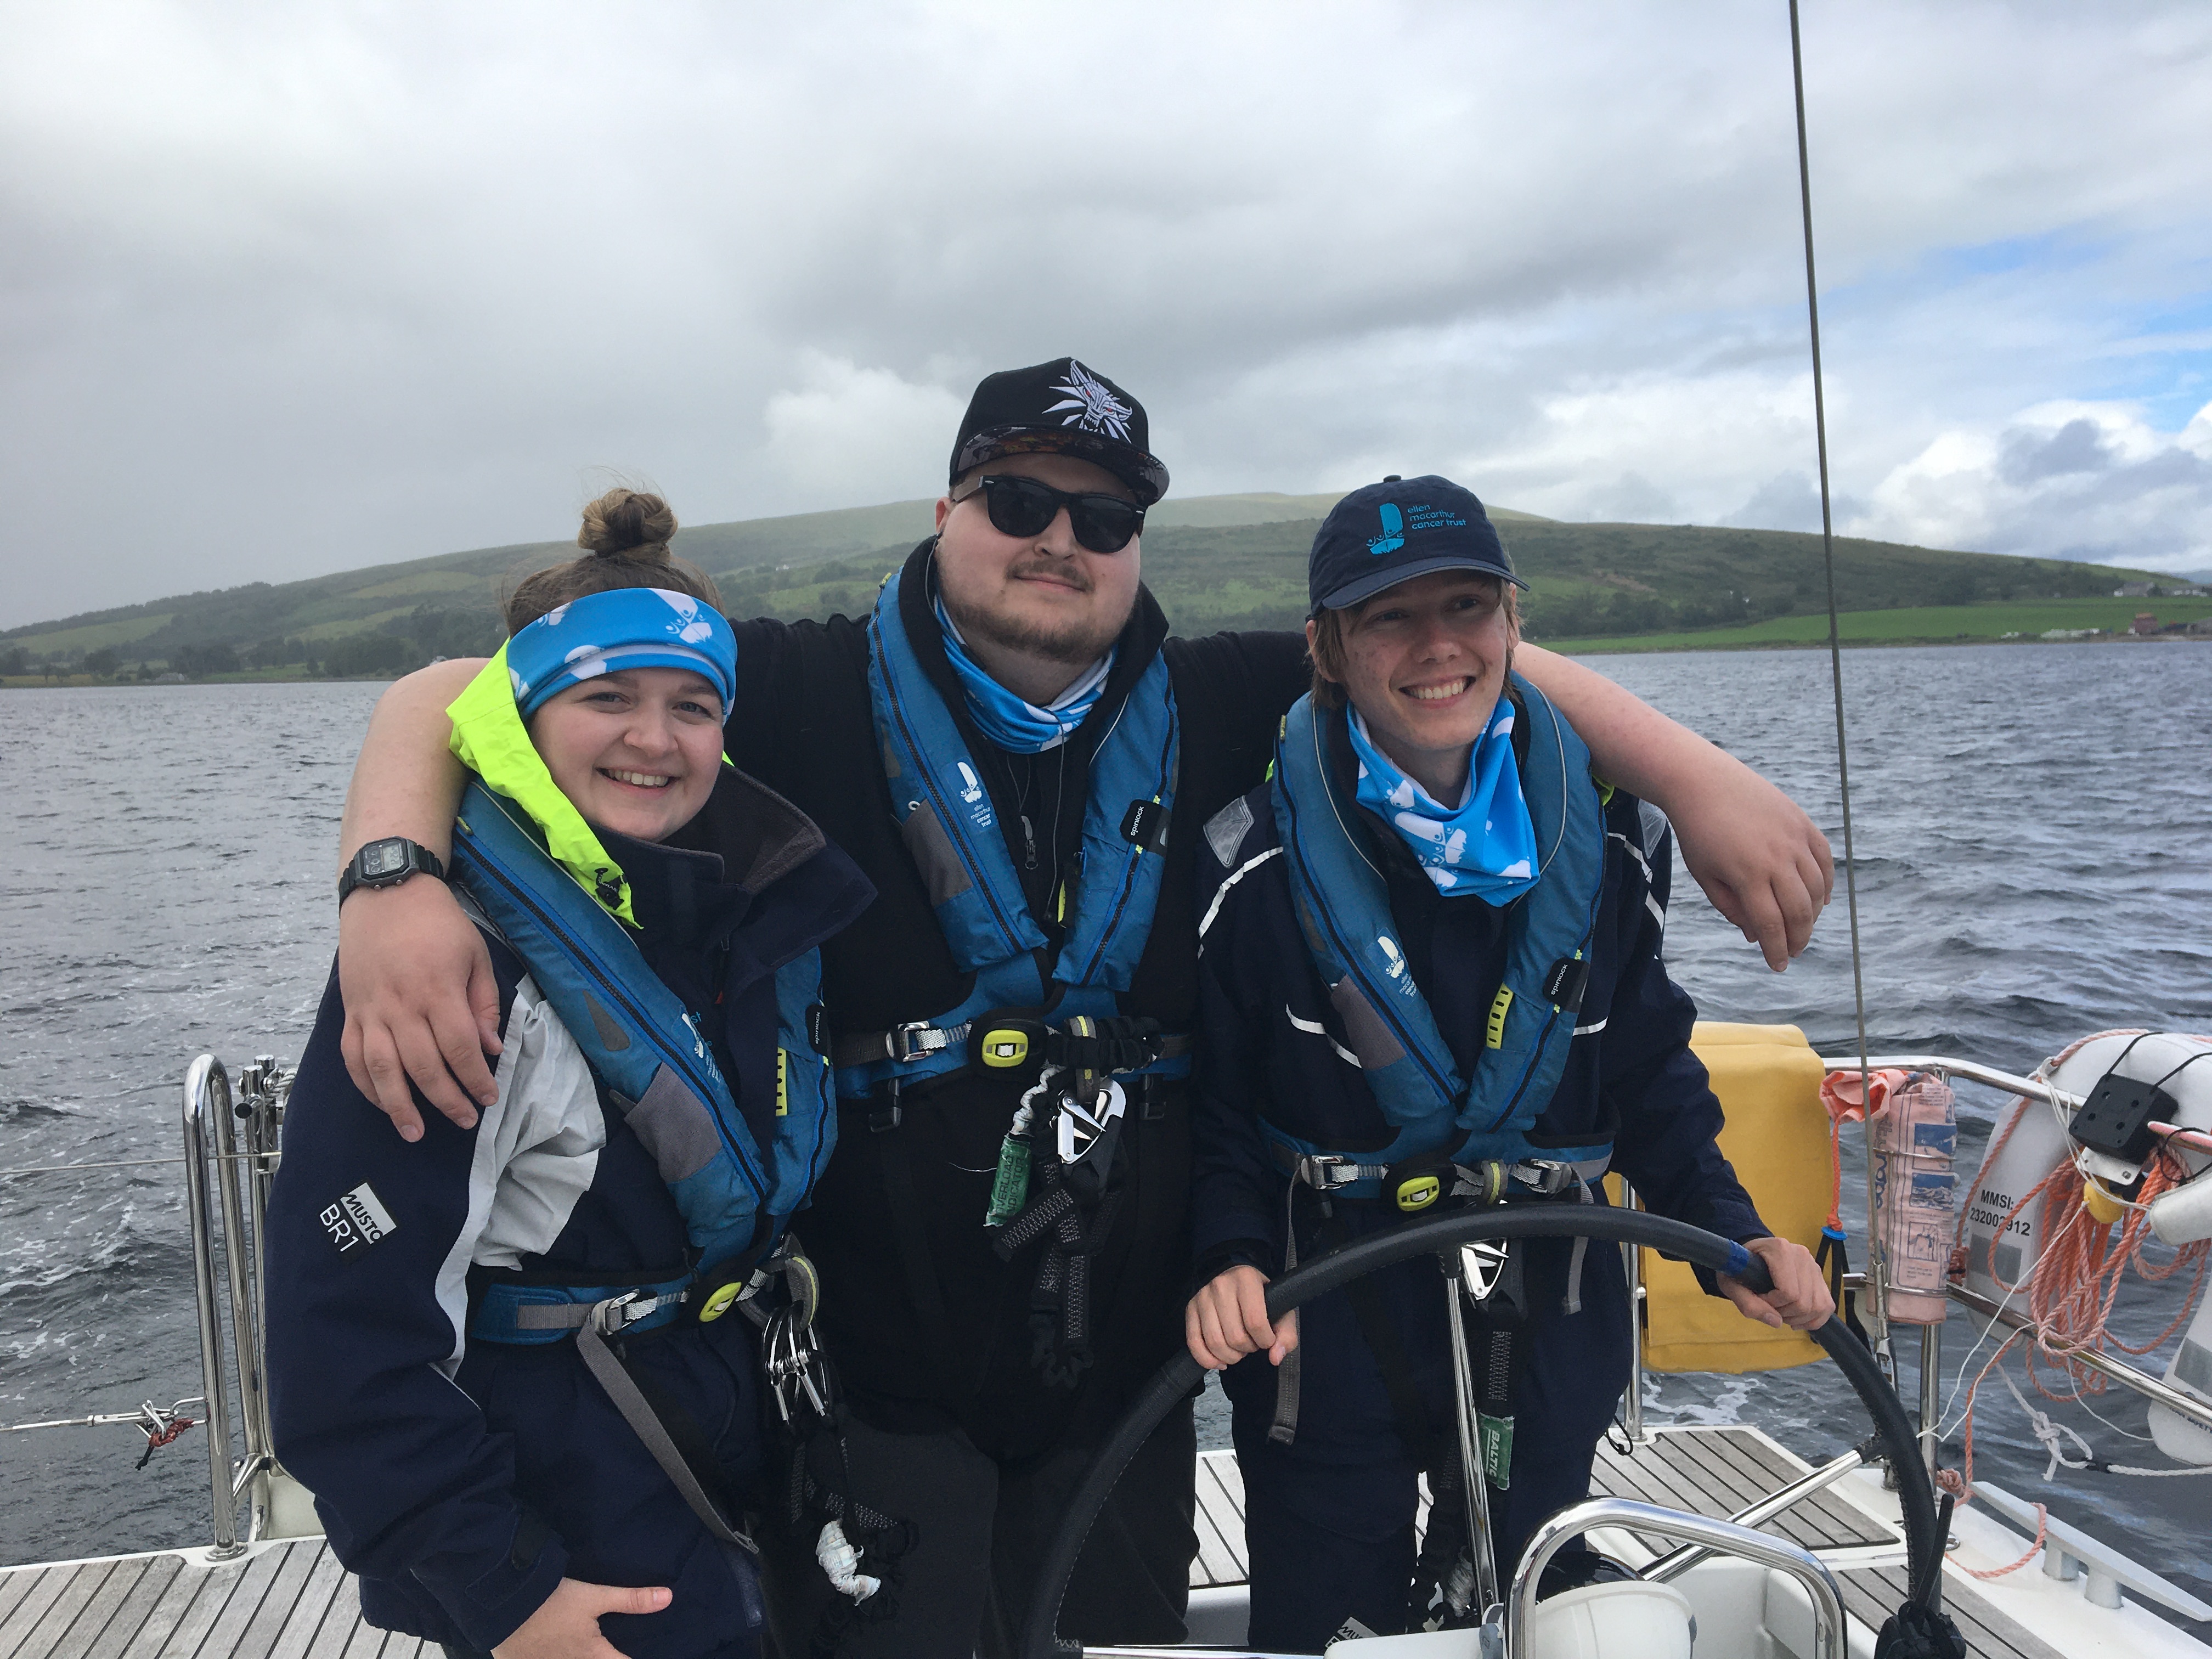 Lucy smiling at the camera with her arm round two crew mates while sailing on a Trust trip in Largs, with grey waters and green hills behind her